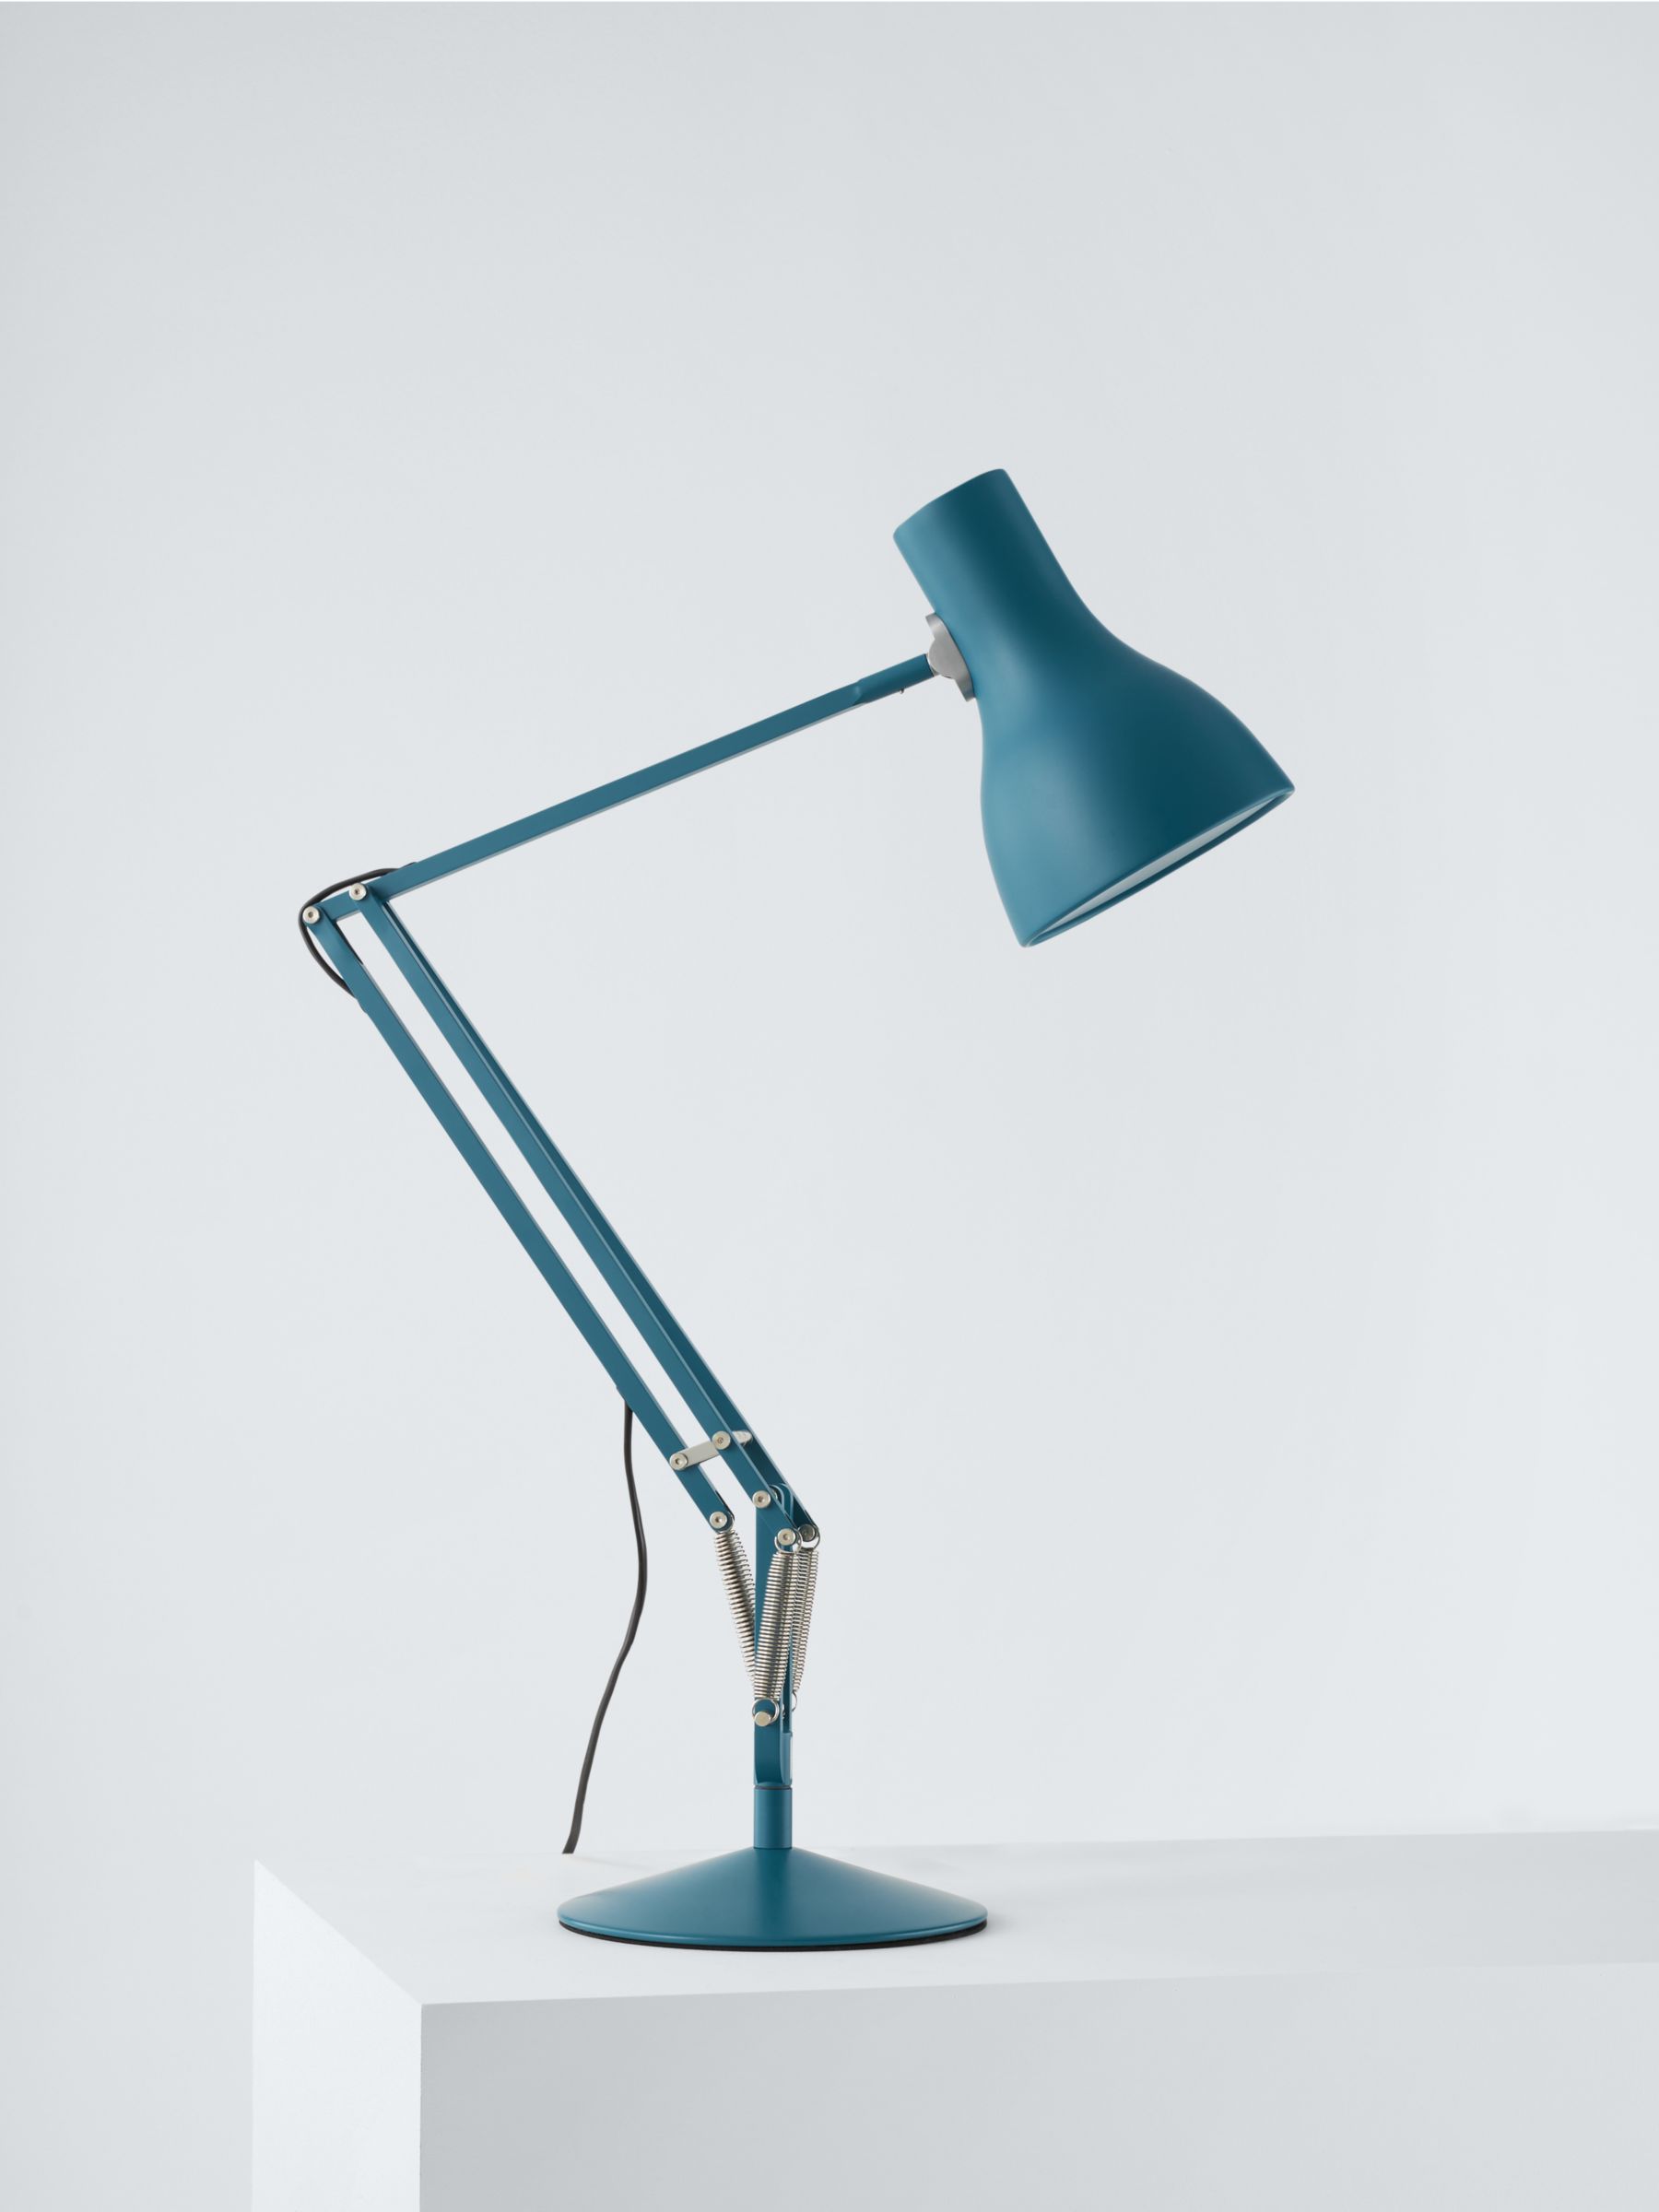 Photo of Anglepoise type 75 margaret howell edition desk lamp saxon blue